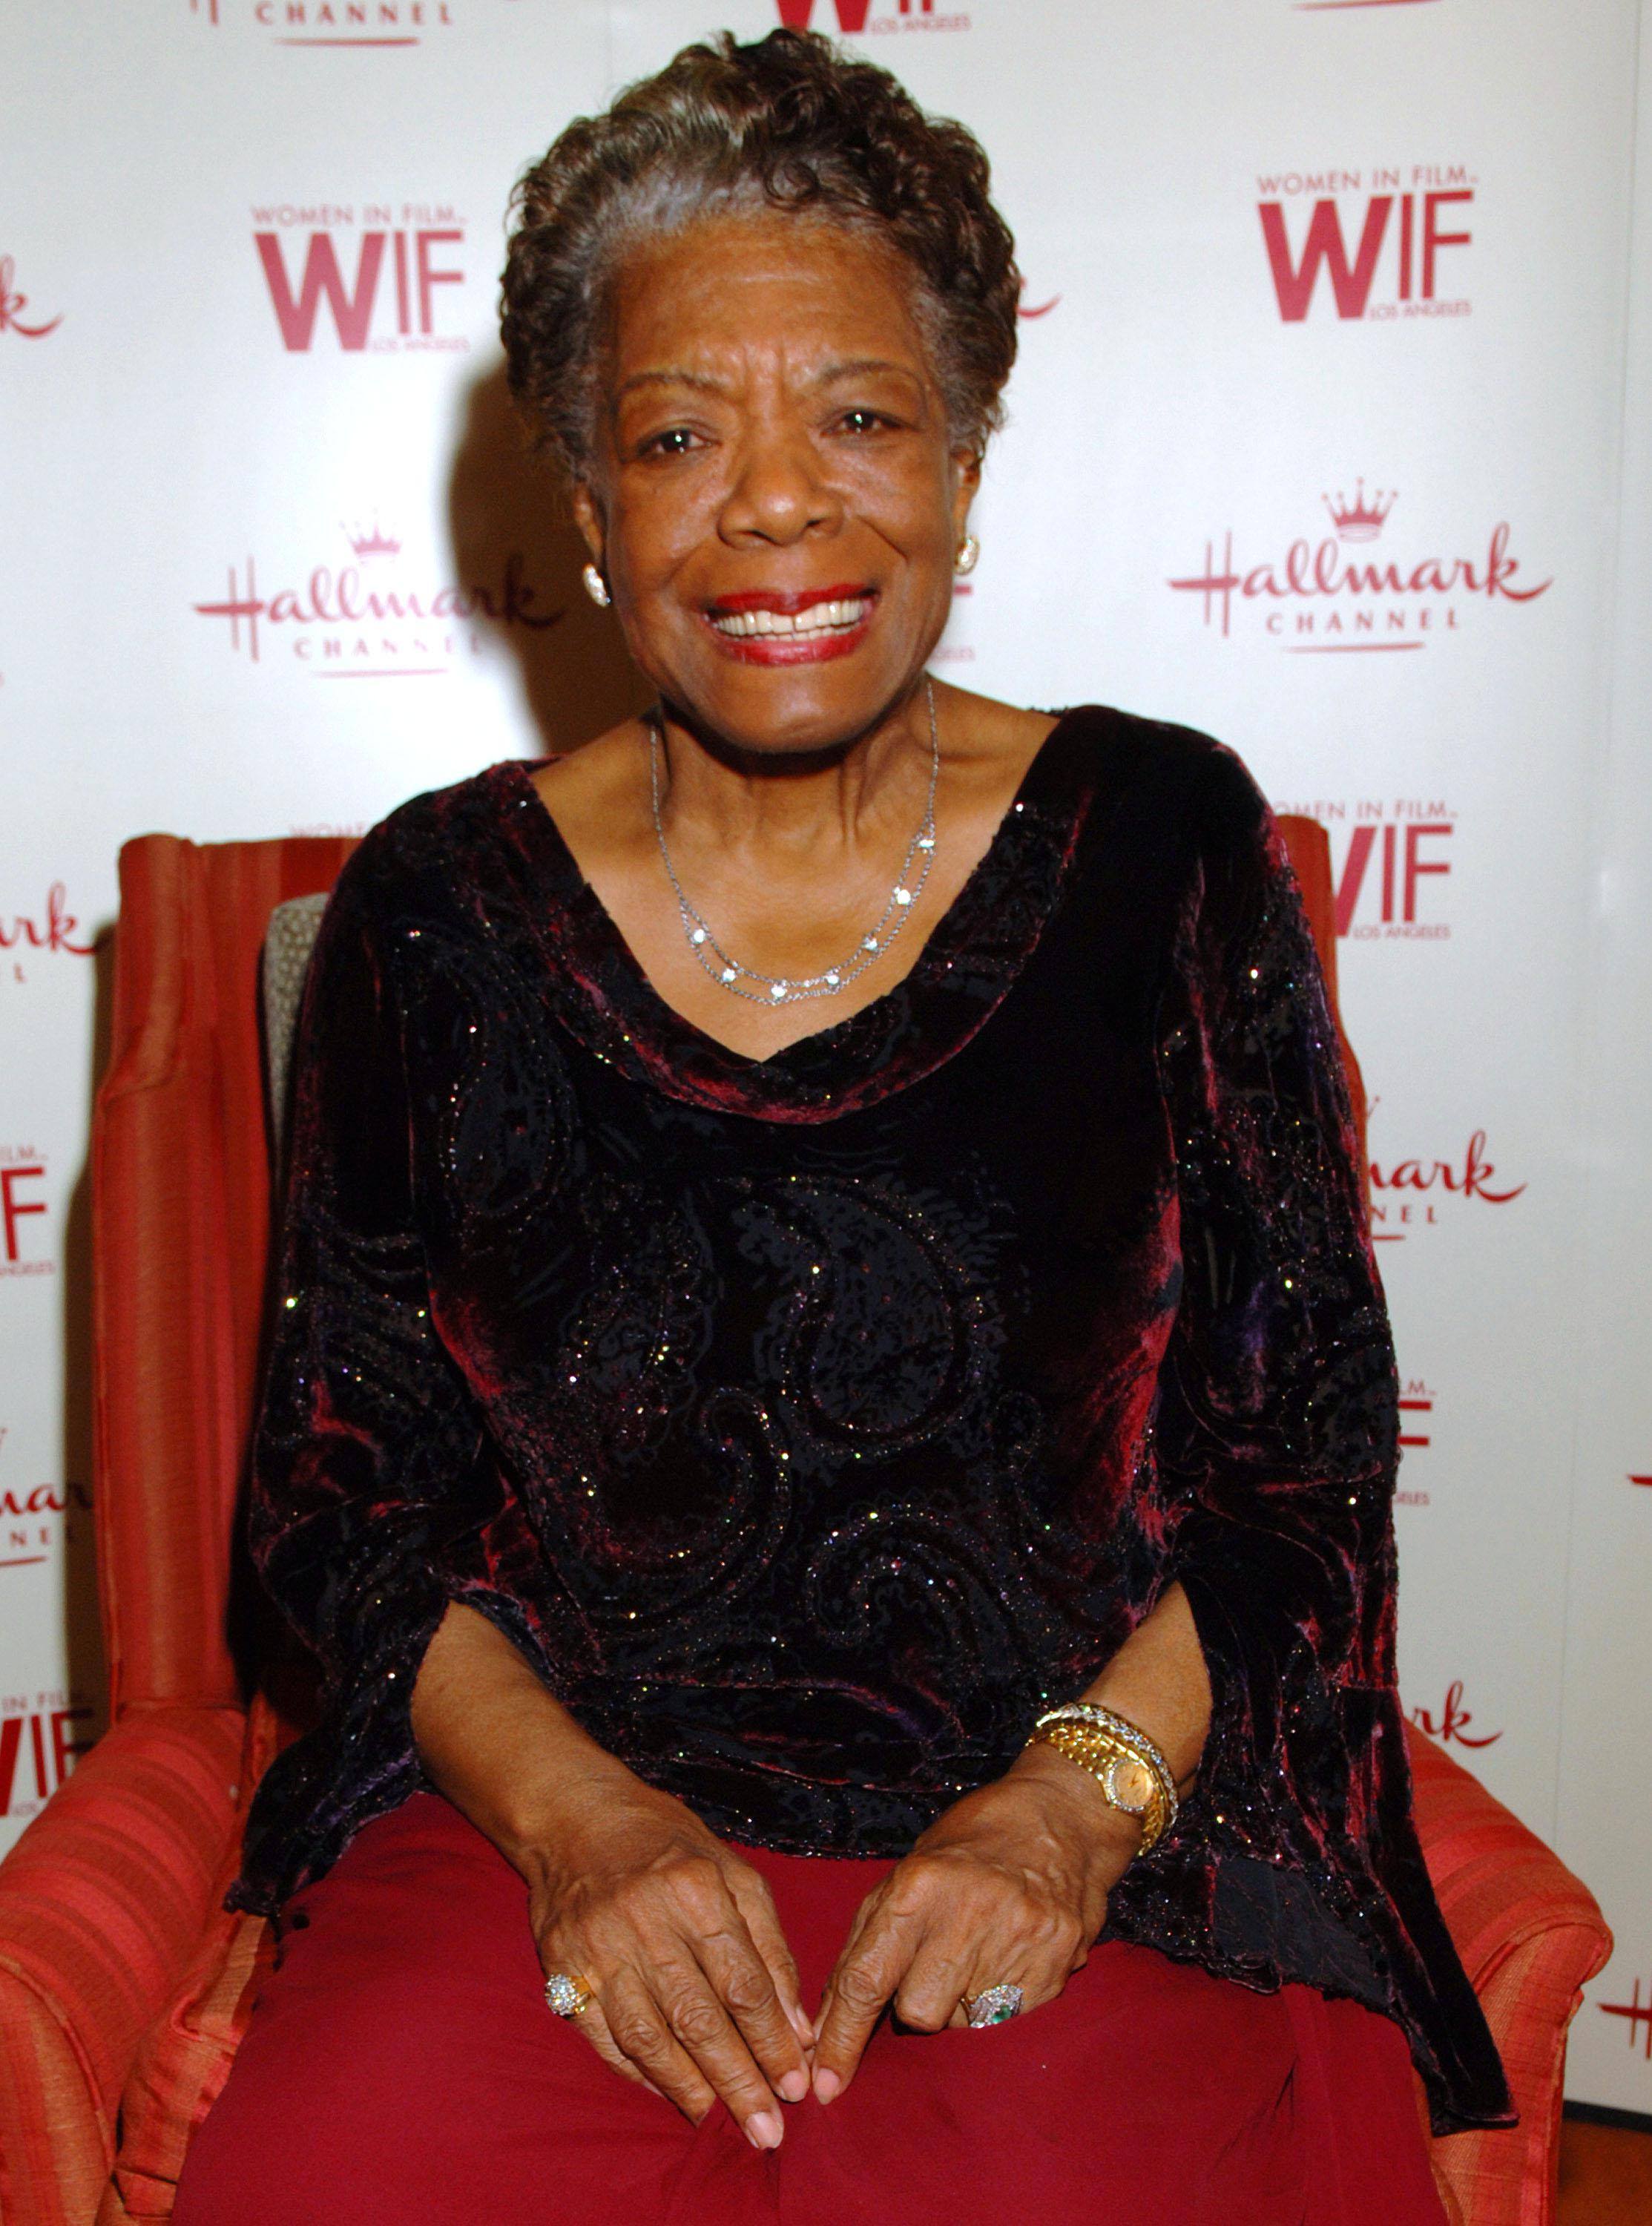 Women in Film and Hallmark Channel Honor Dr. Maya Angelou - Arrivals